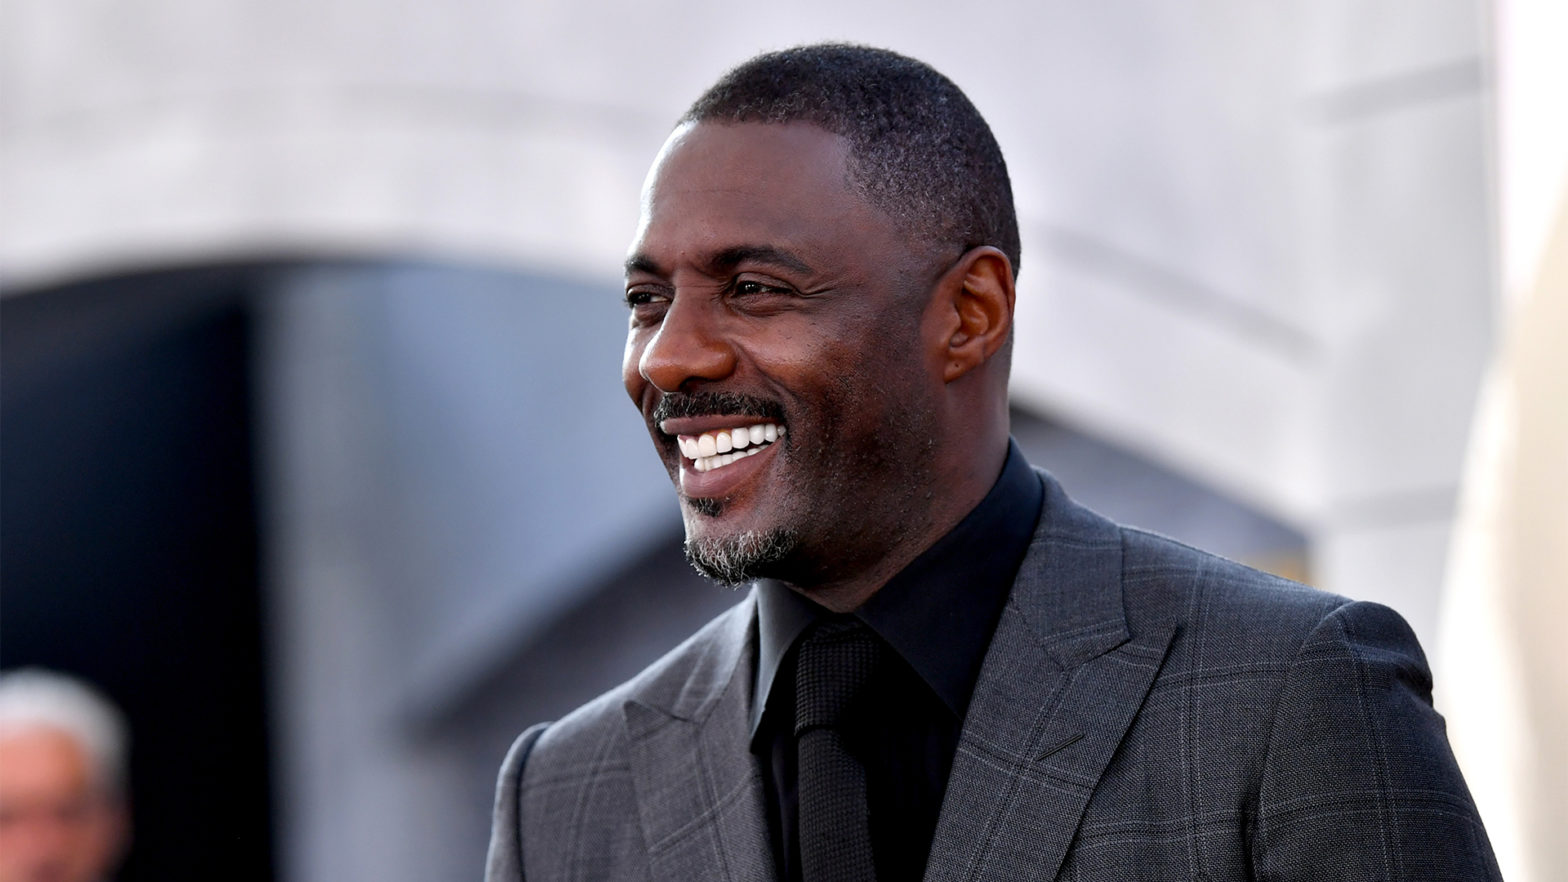 Idris Elba Reportedly Looking To Join In $1.2B Bid To Purchase British Broadcaster Channel 4